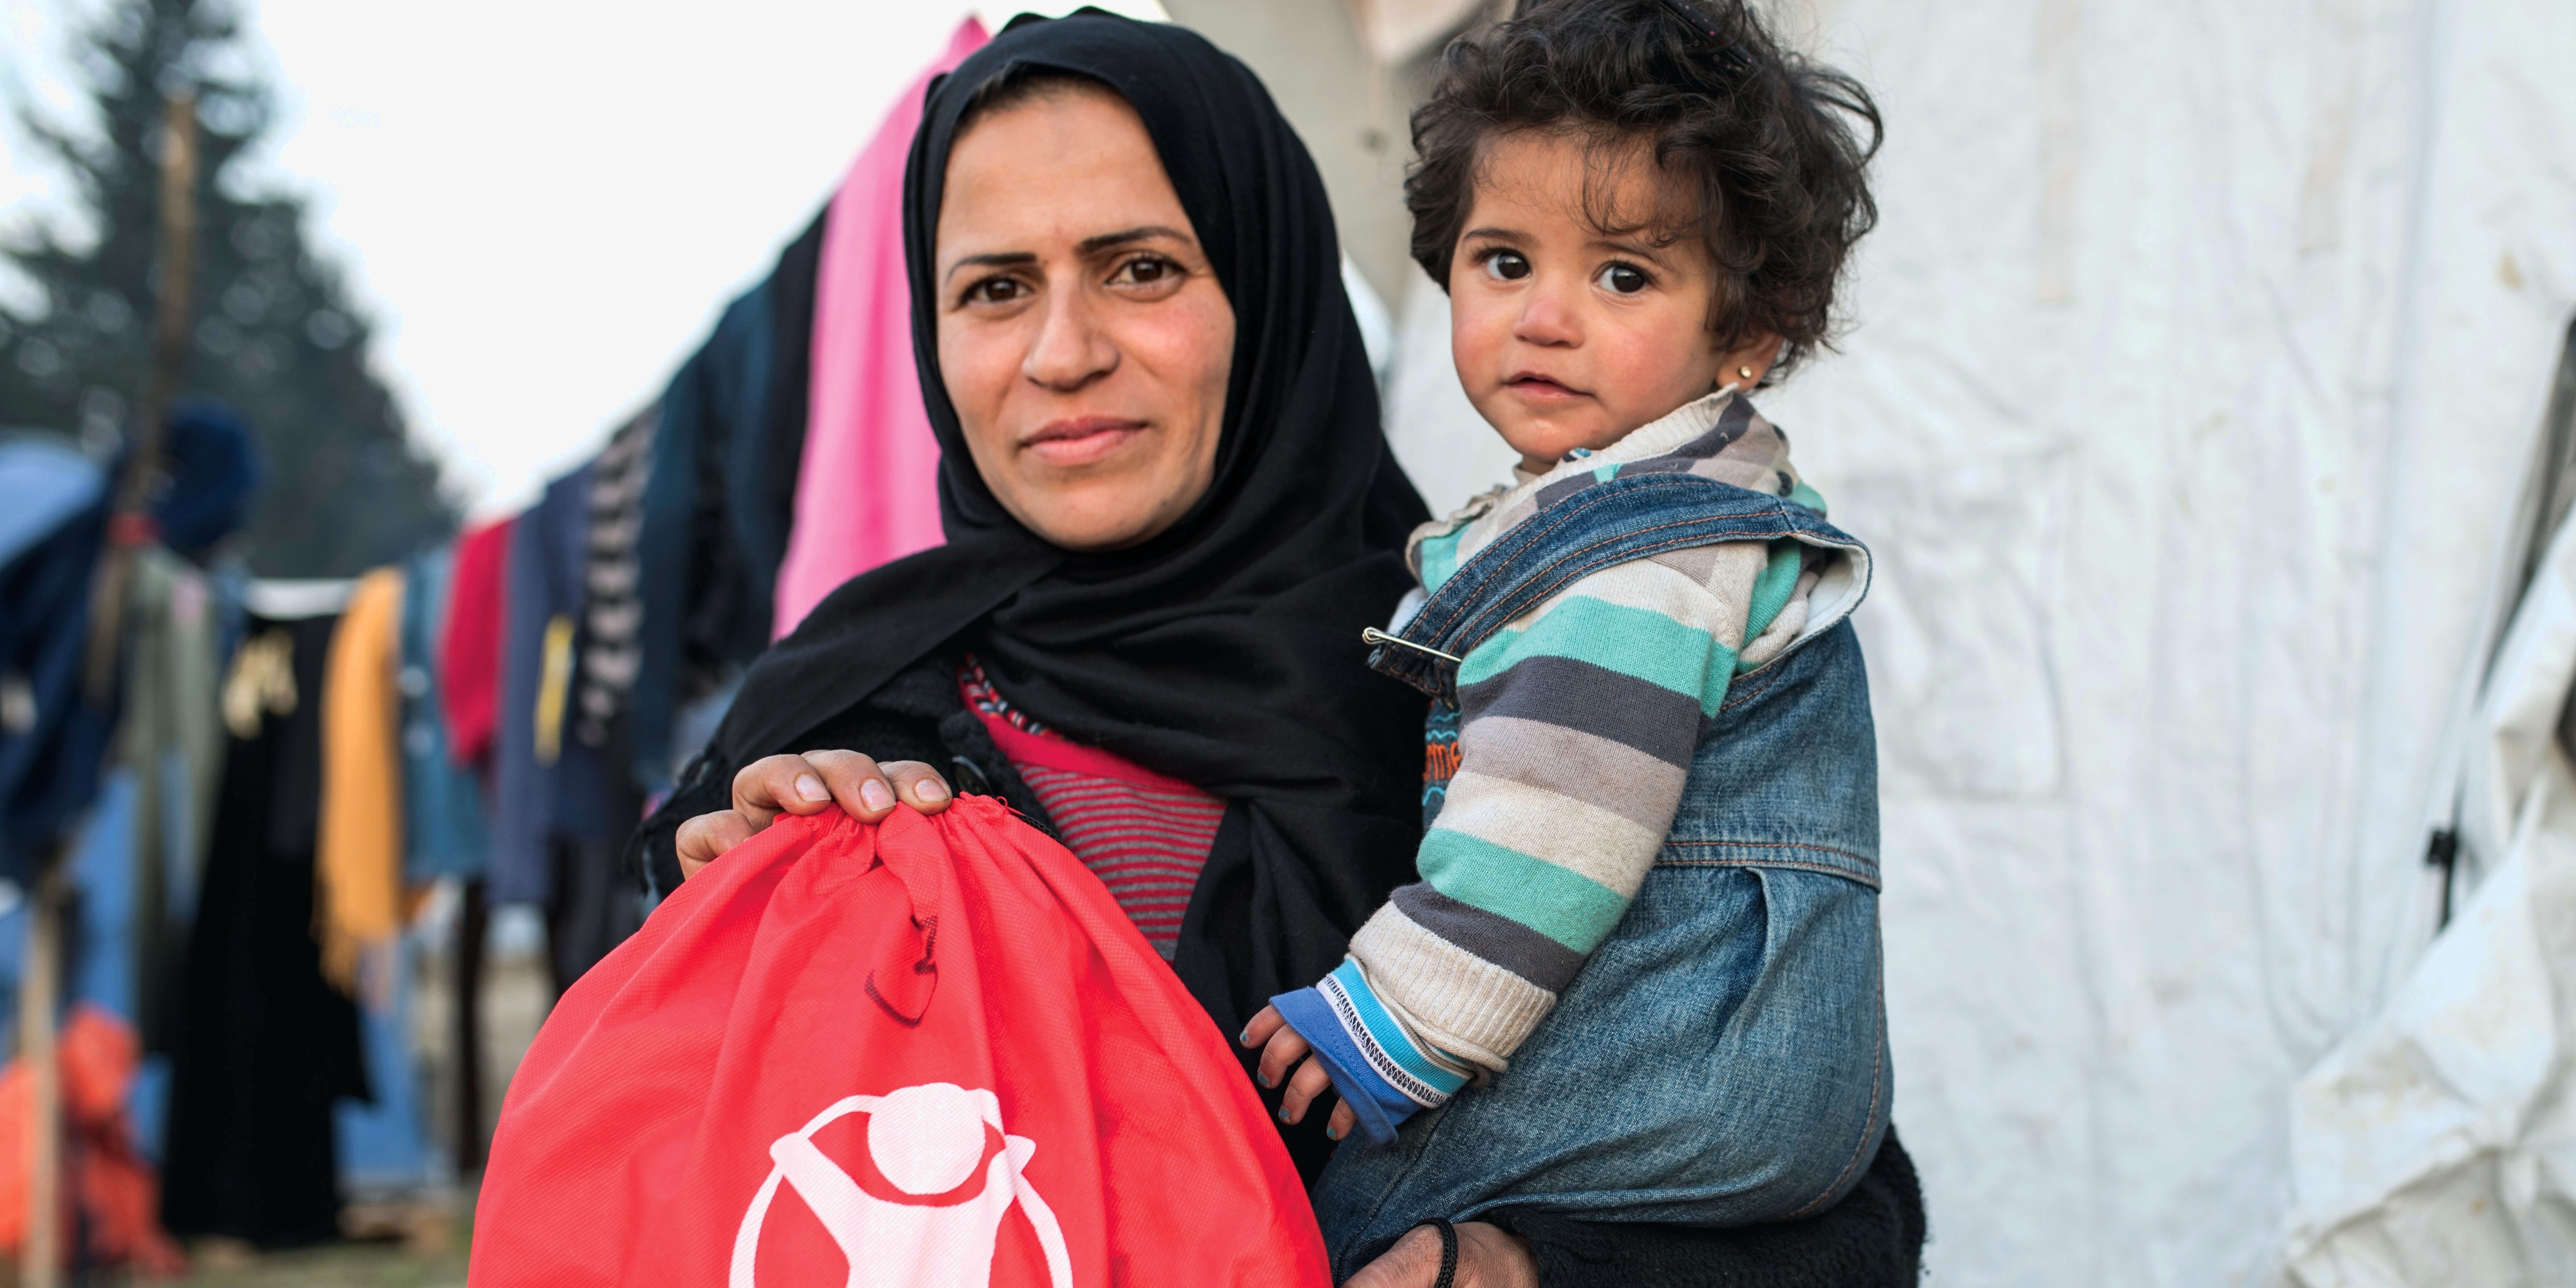 A mother and child in a refugee camp hold a hygiene kit, made possible through the generosity of a Save the Children donor. Photo credit: Save the Children. 